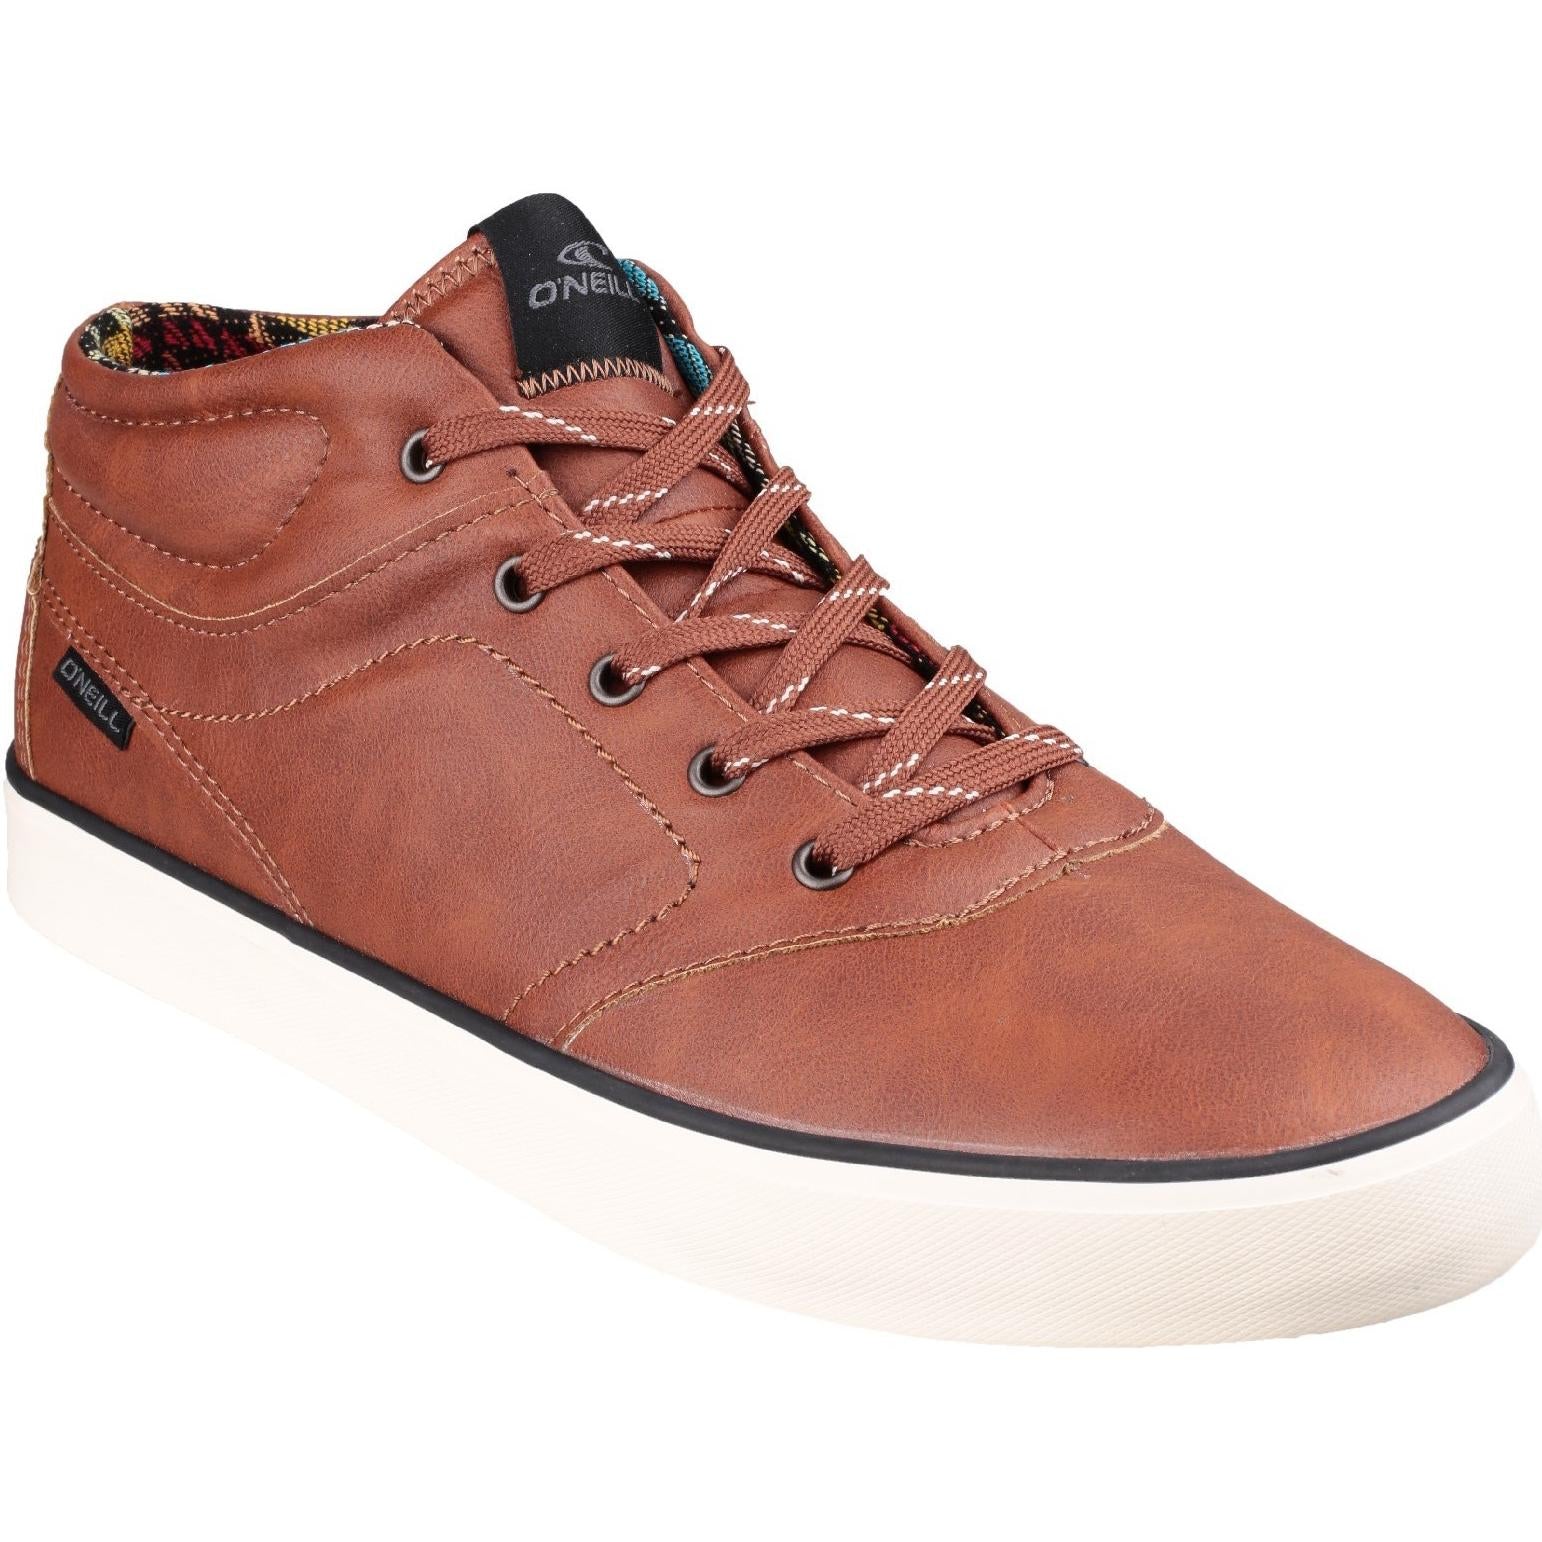 O'neill Psycho Mid Lace up Shoes